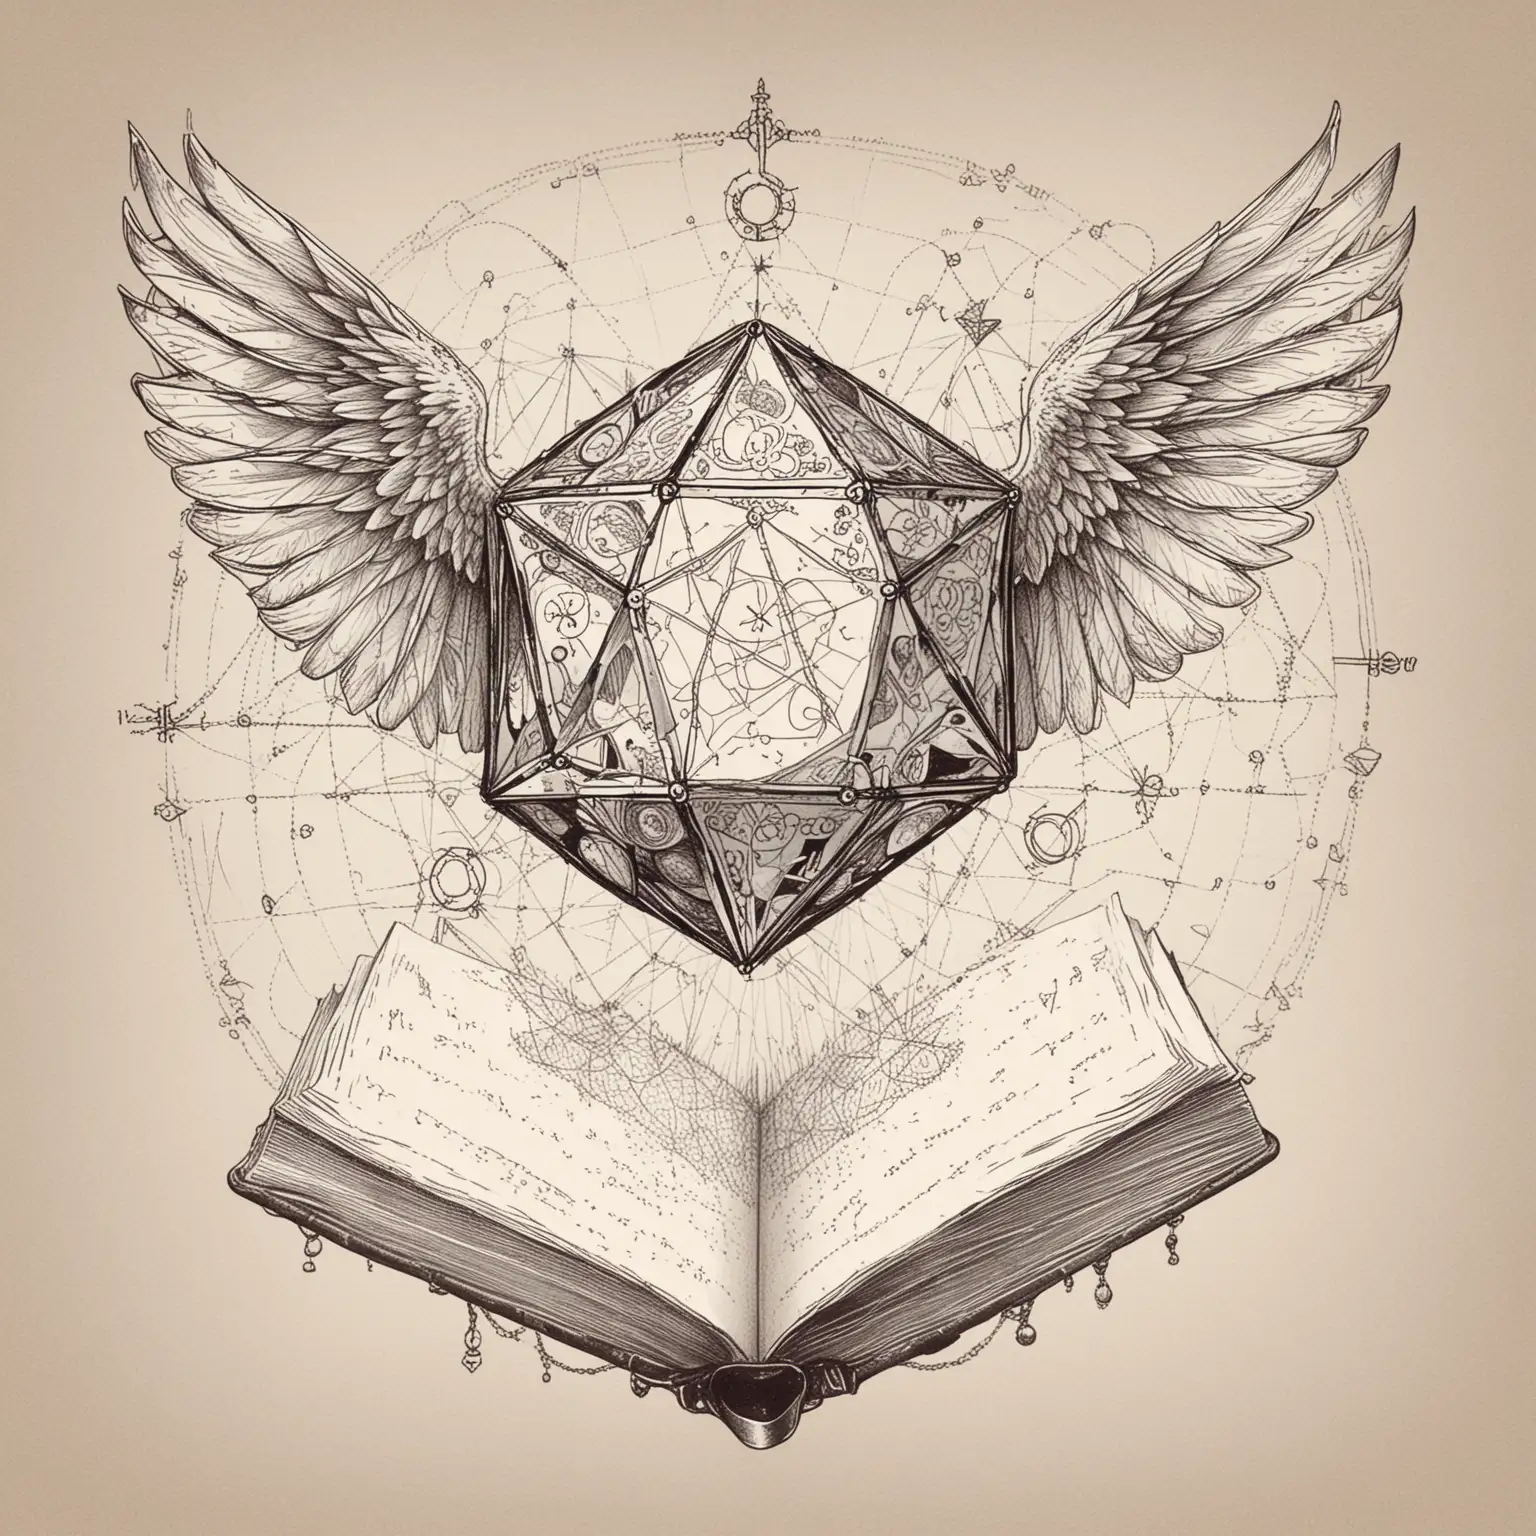 Line art, simple book style, icosohedron d20 , wings and magical circles 